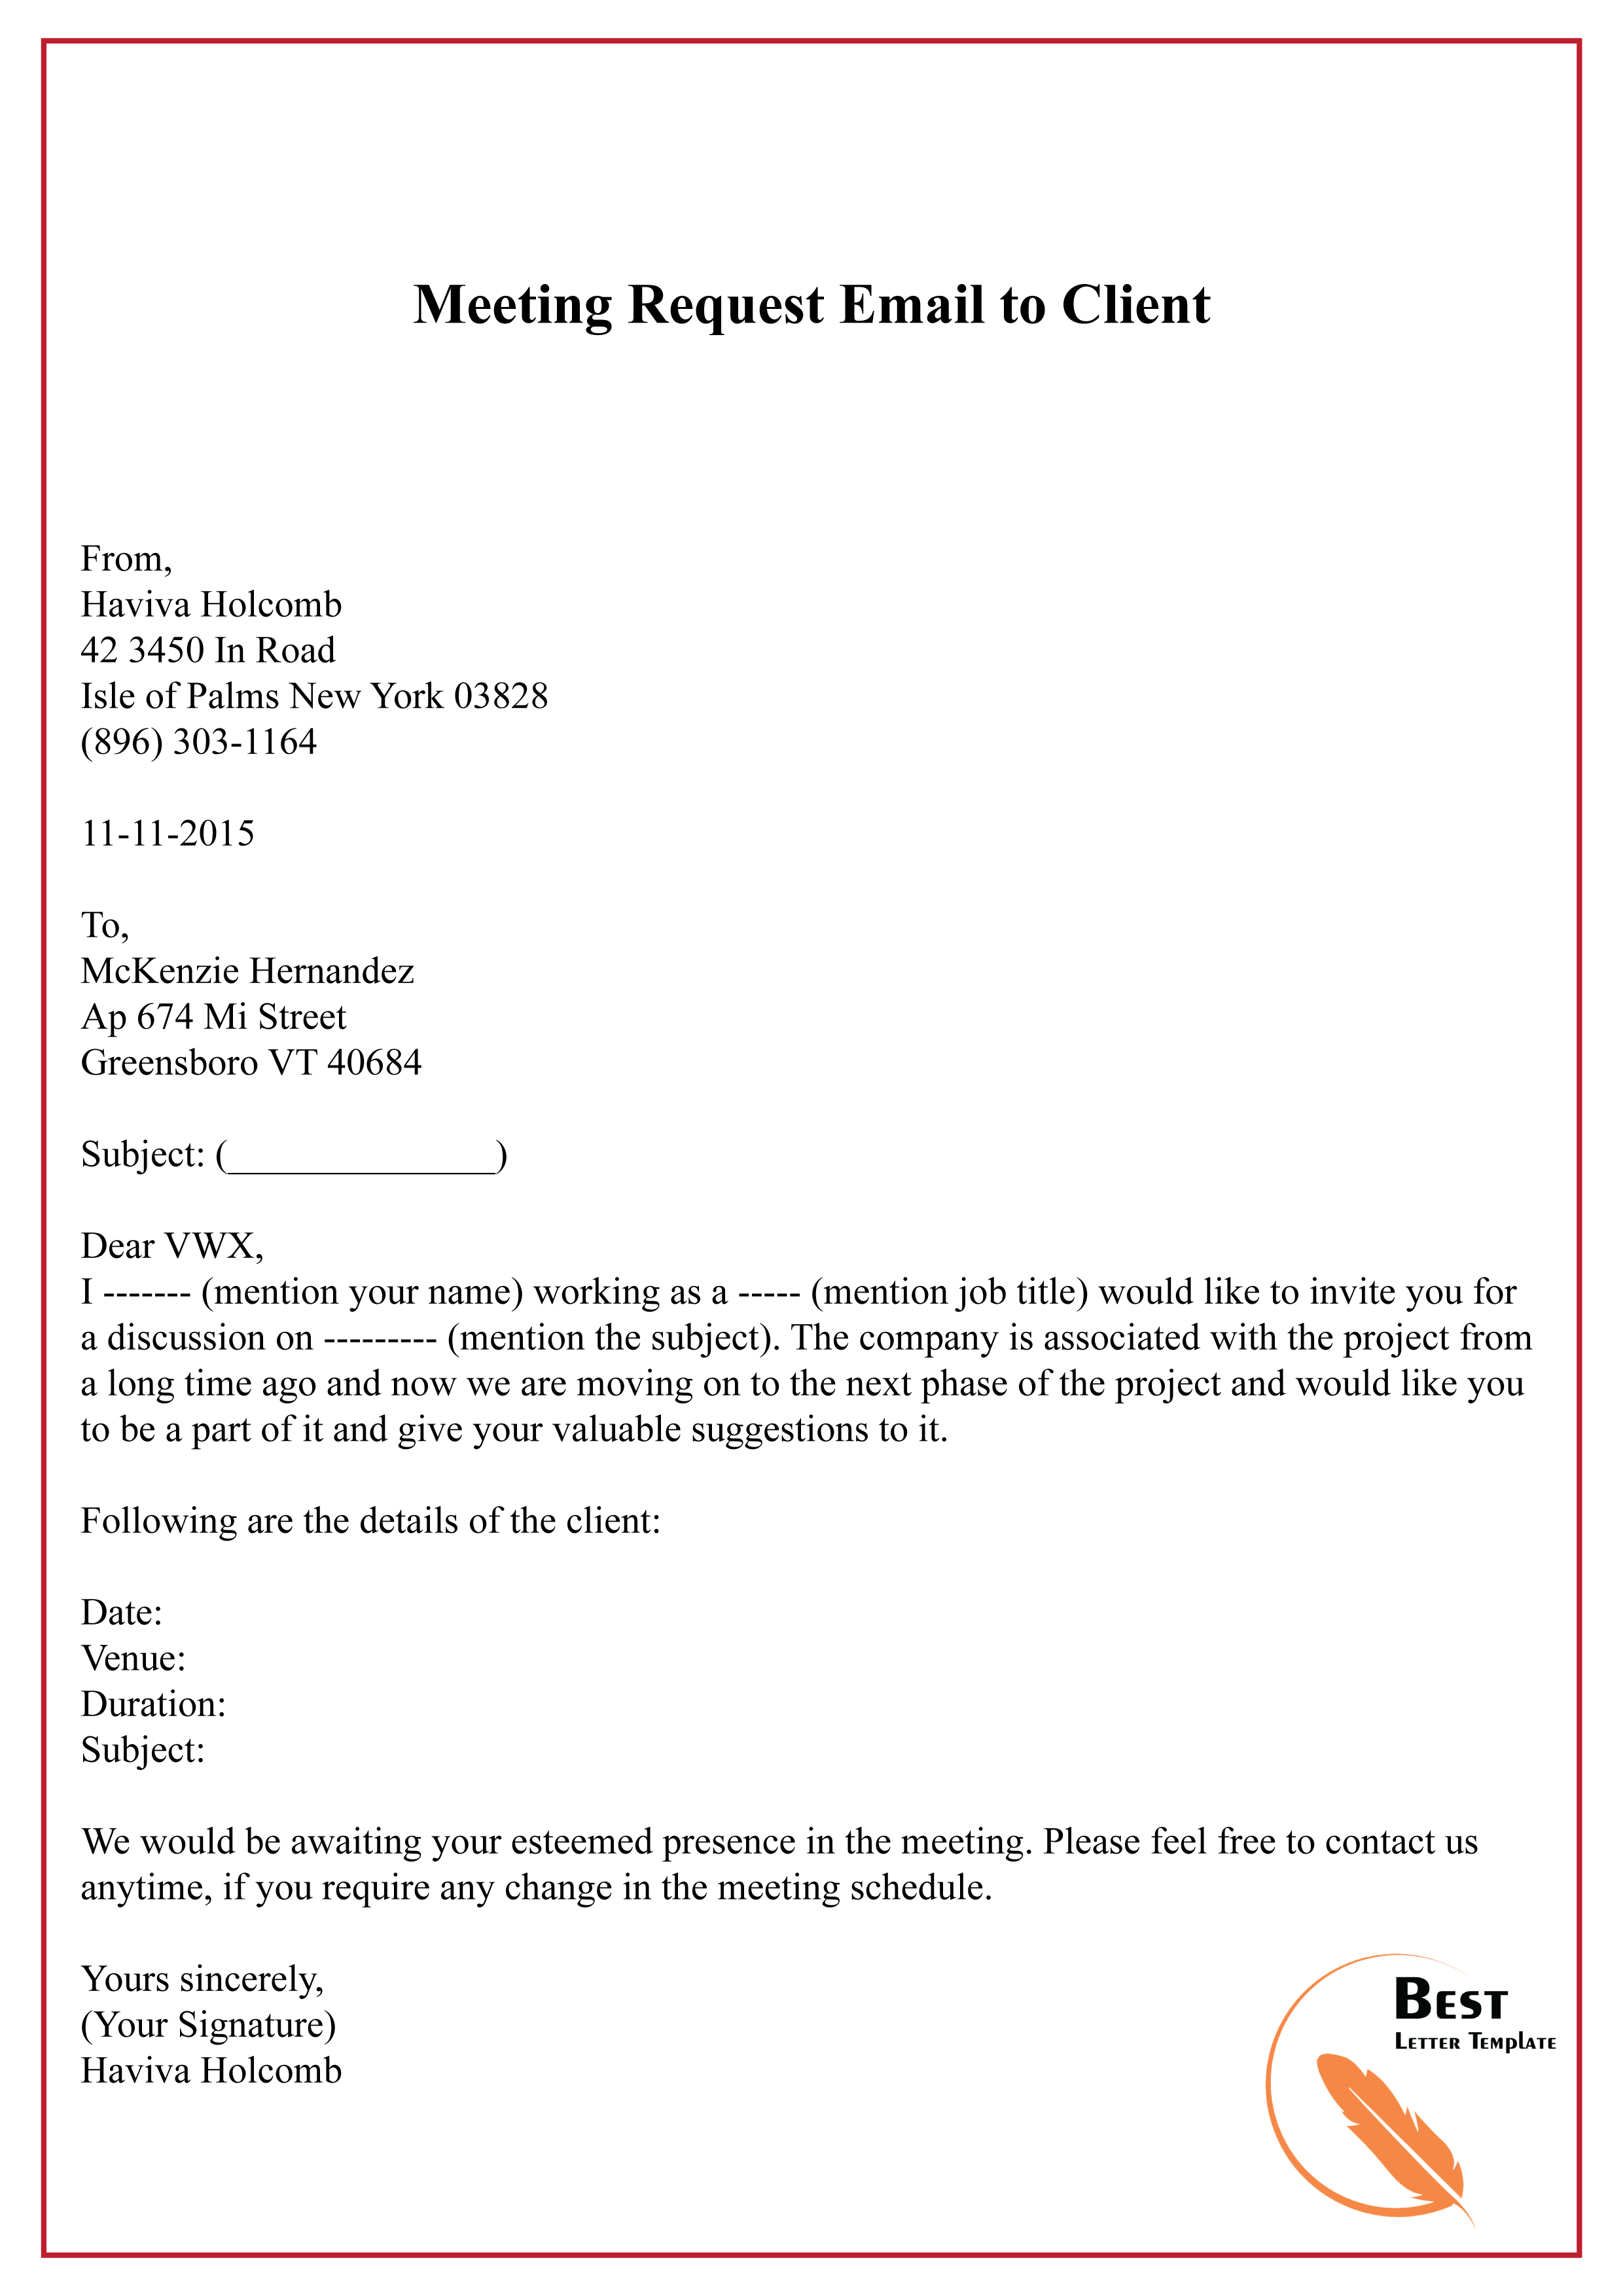 Meeting Request Email to Client01 Best Letter Template